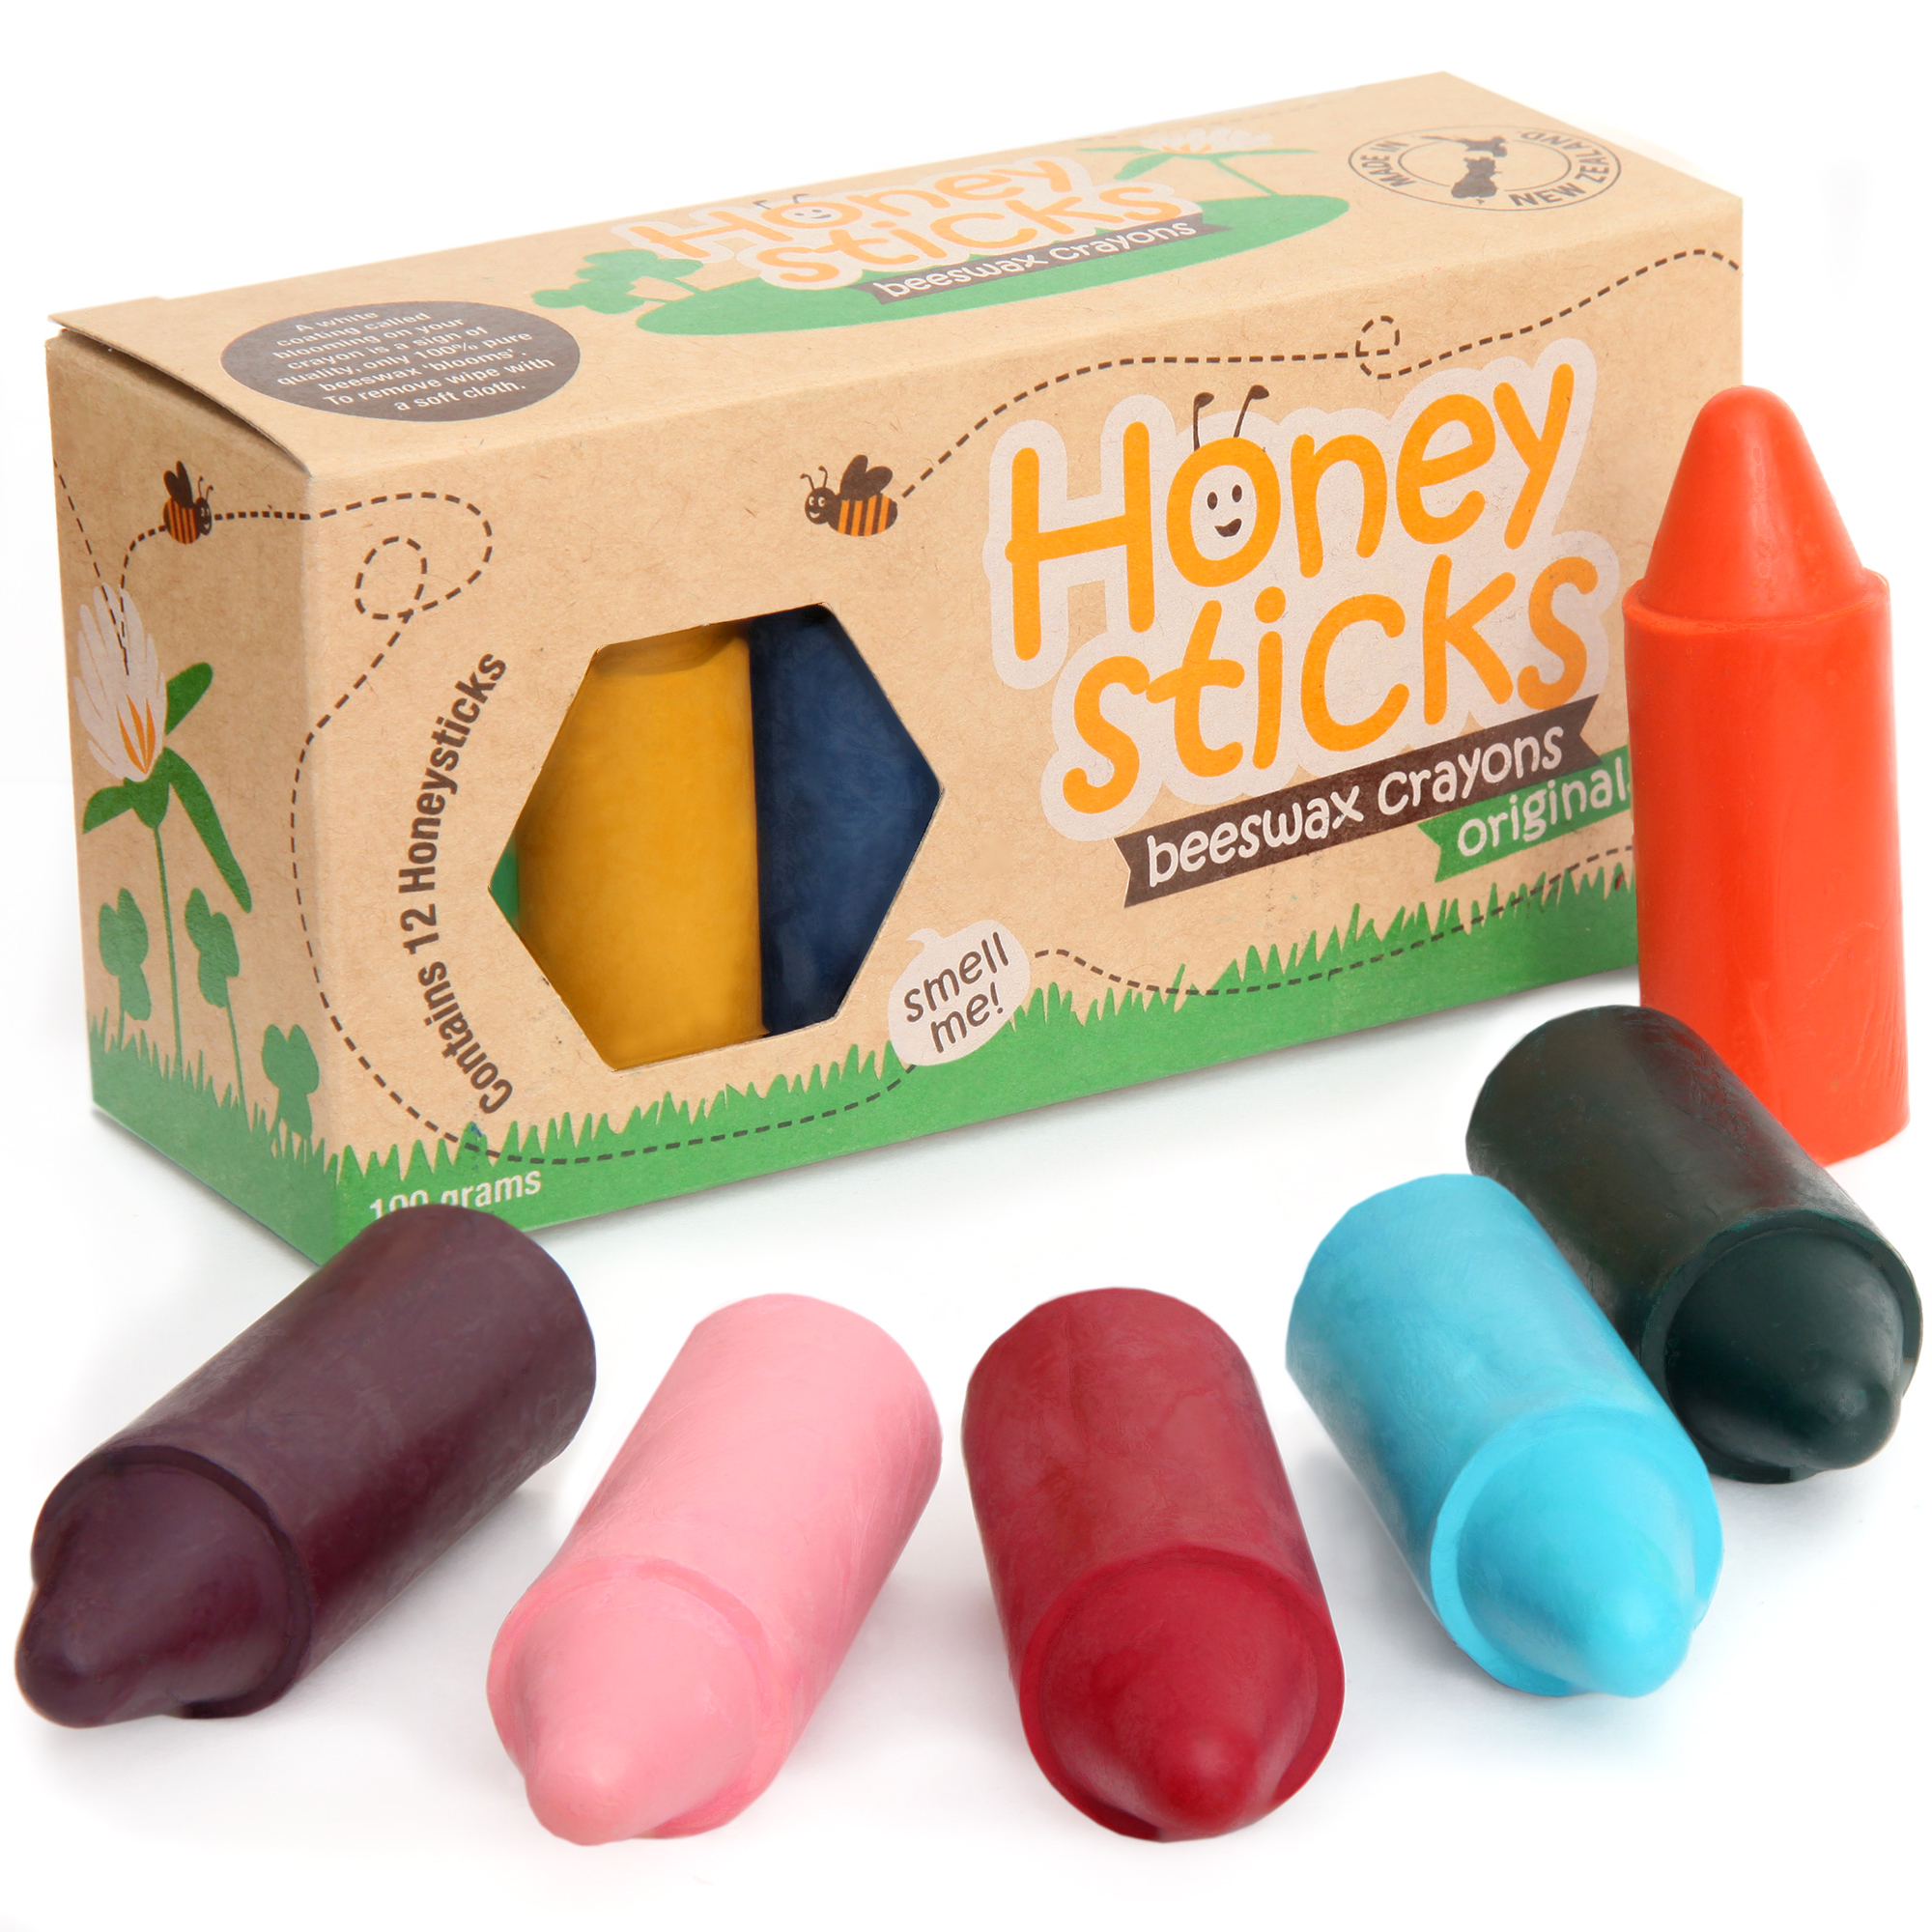 Honeysticks 100% Pure Beeswax Crayons (12 Pack) - Non Toxic Crayons Handmade with Natural Beeswax and Food Grade Colours - Child / Toddler Safe, Easy to Hold and Use - Sustainably Made in New Zealand - image 1 of 6